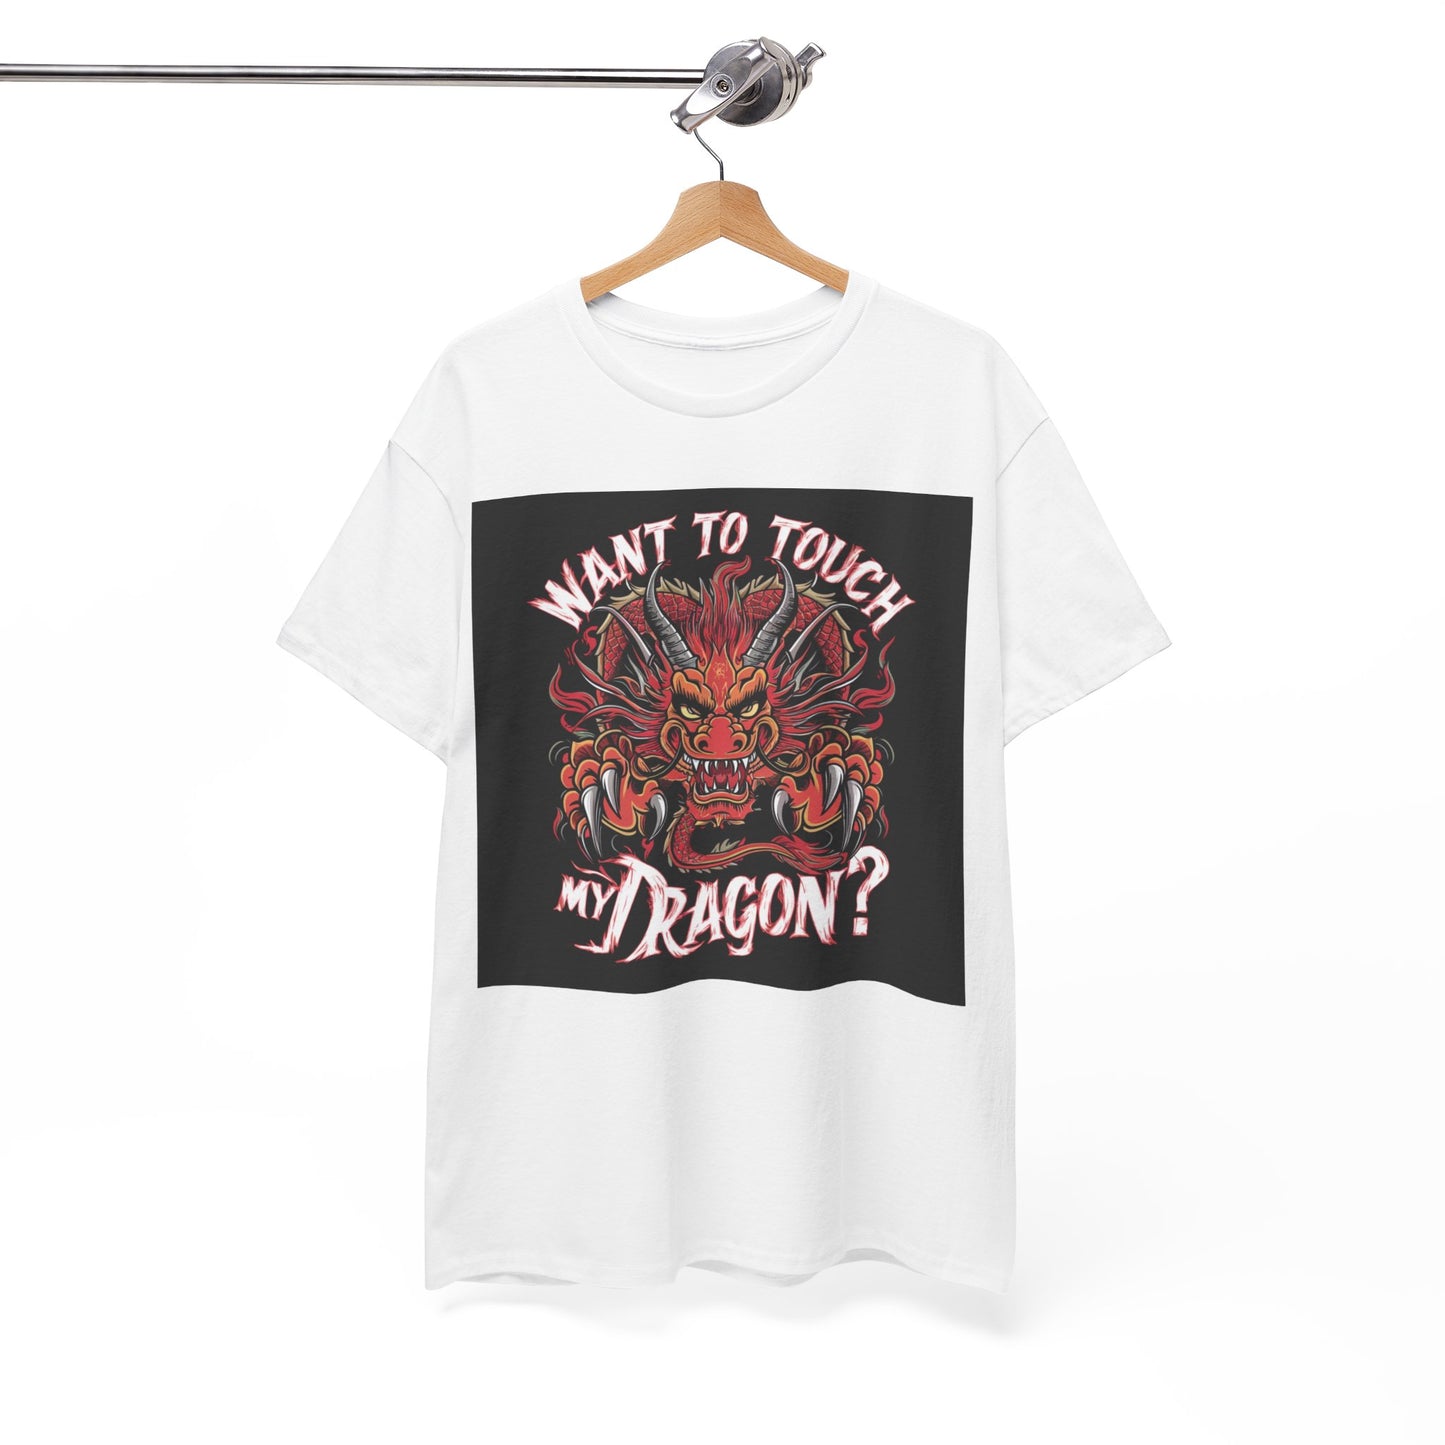 Want to Touch My Dragon? - Red -Unisex Heavy Cotton Tee